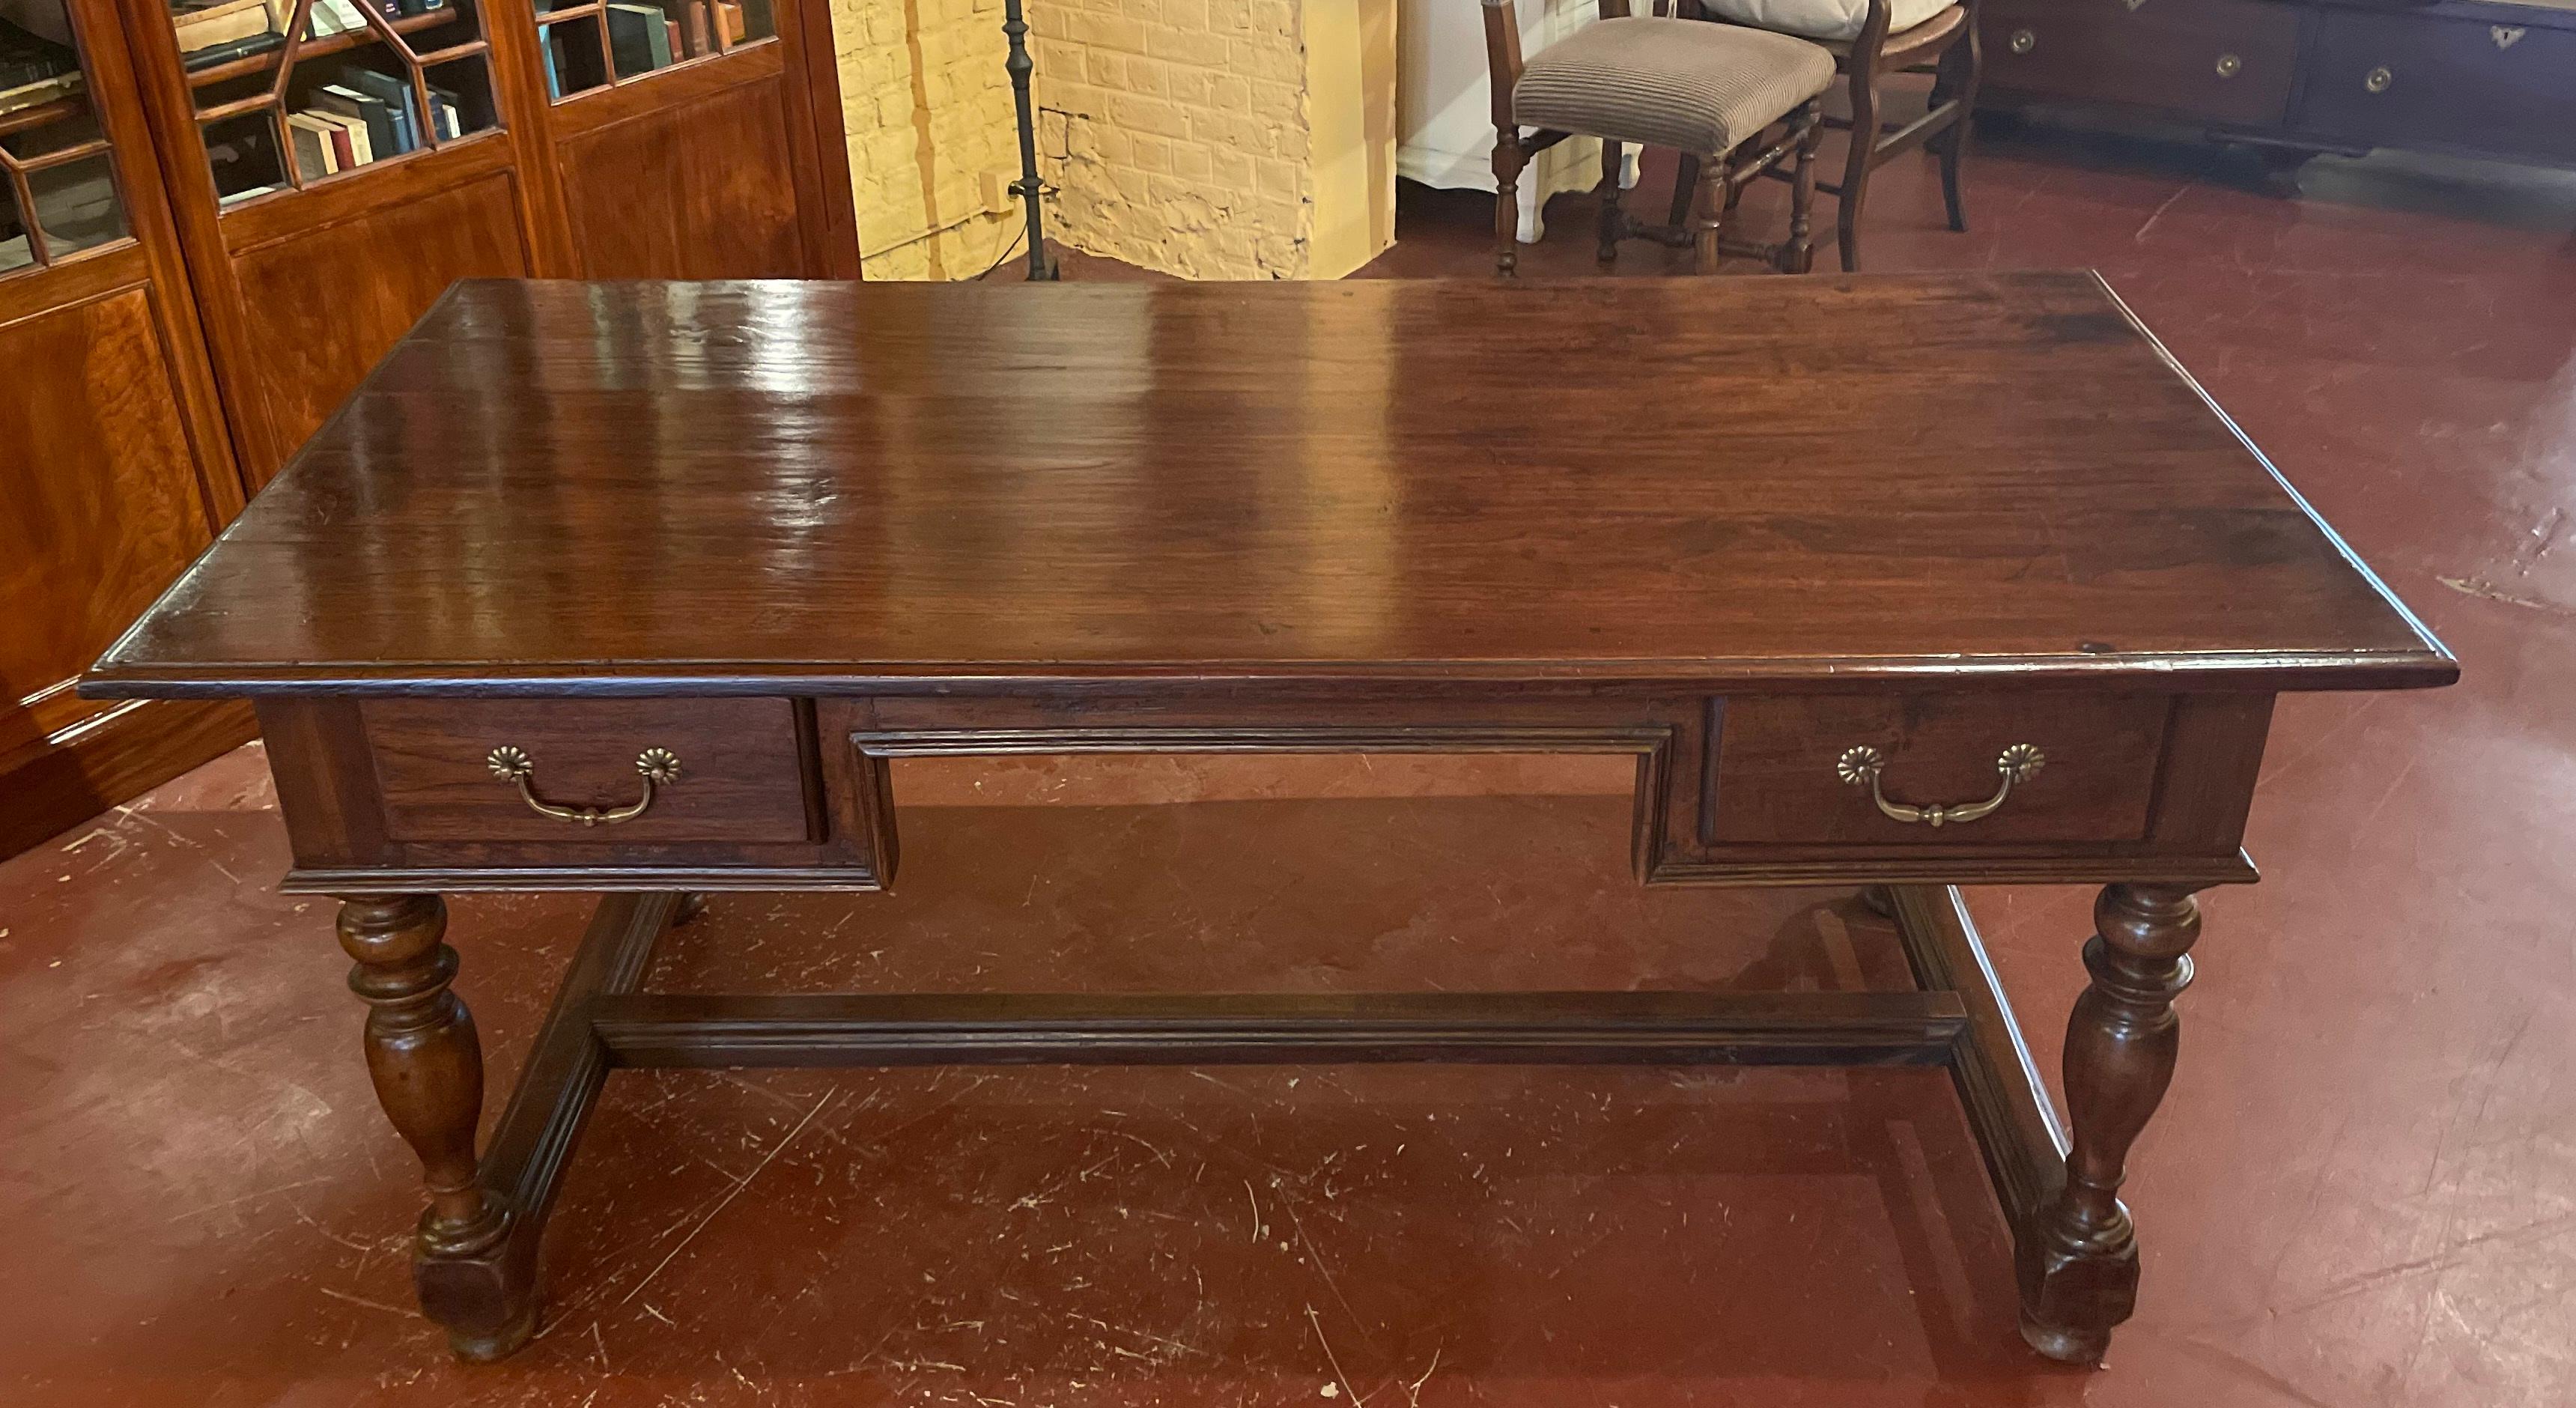 Very elegant writing desk from the Netherlands from the beginning of the 19th century in colonial wood
flat desk with two drawers which has a very elegant base with turned legs connected by an H spacer

Very beautiful table top with a beautiful